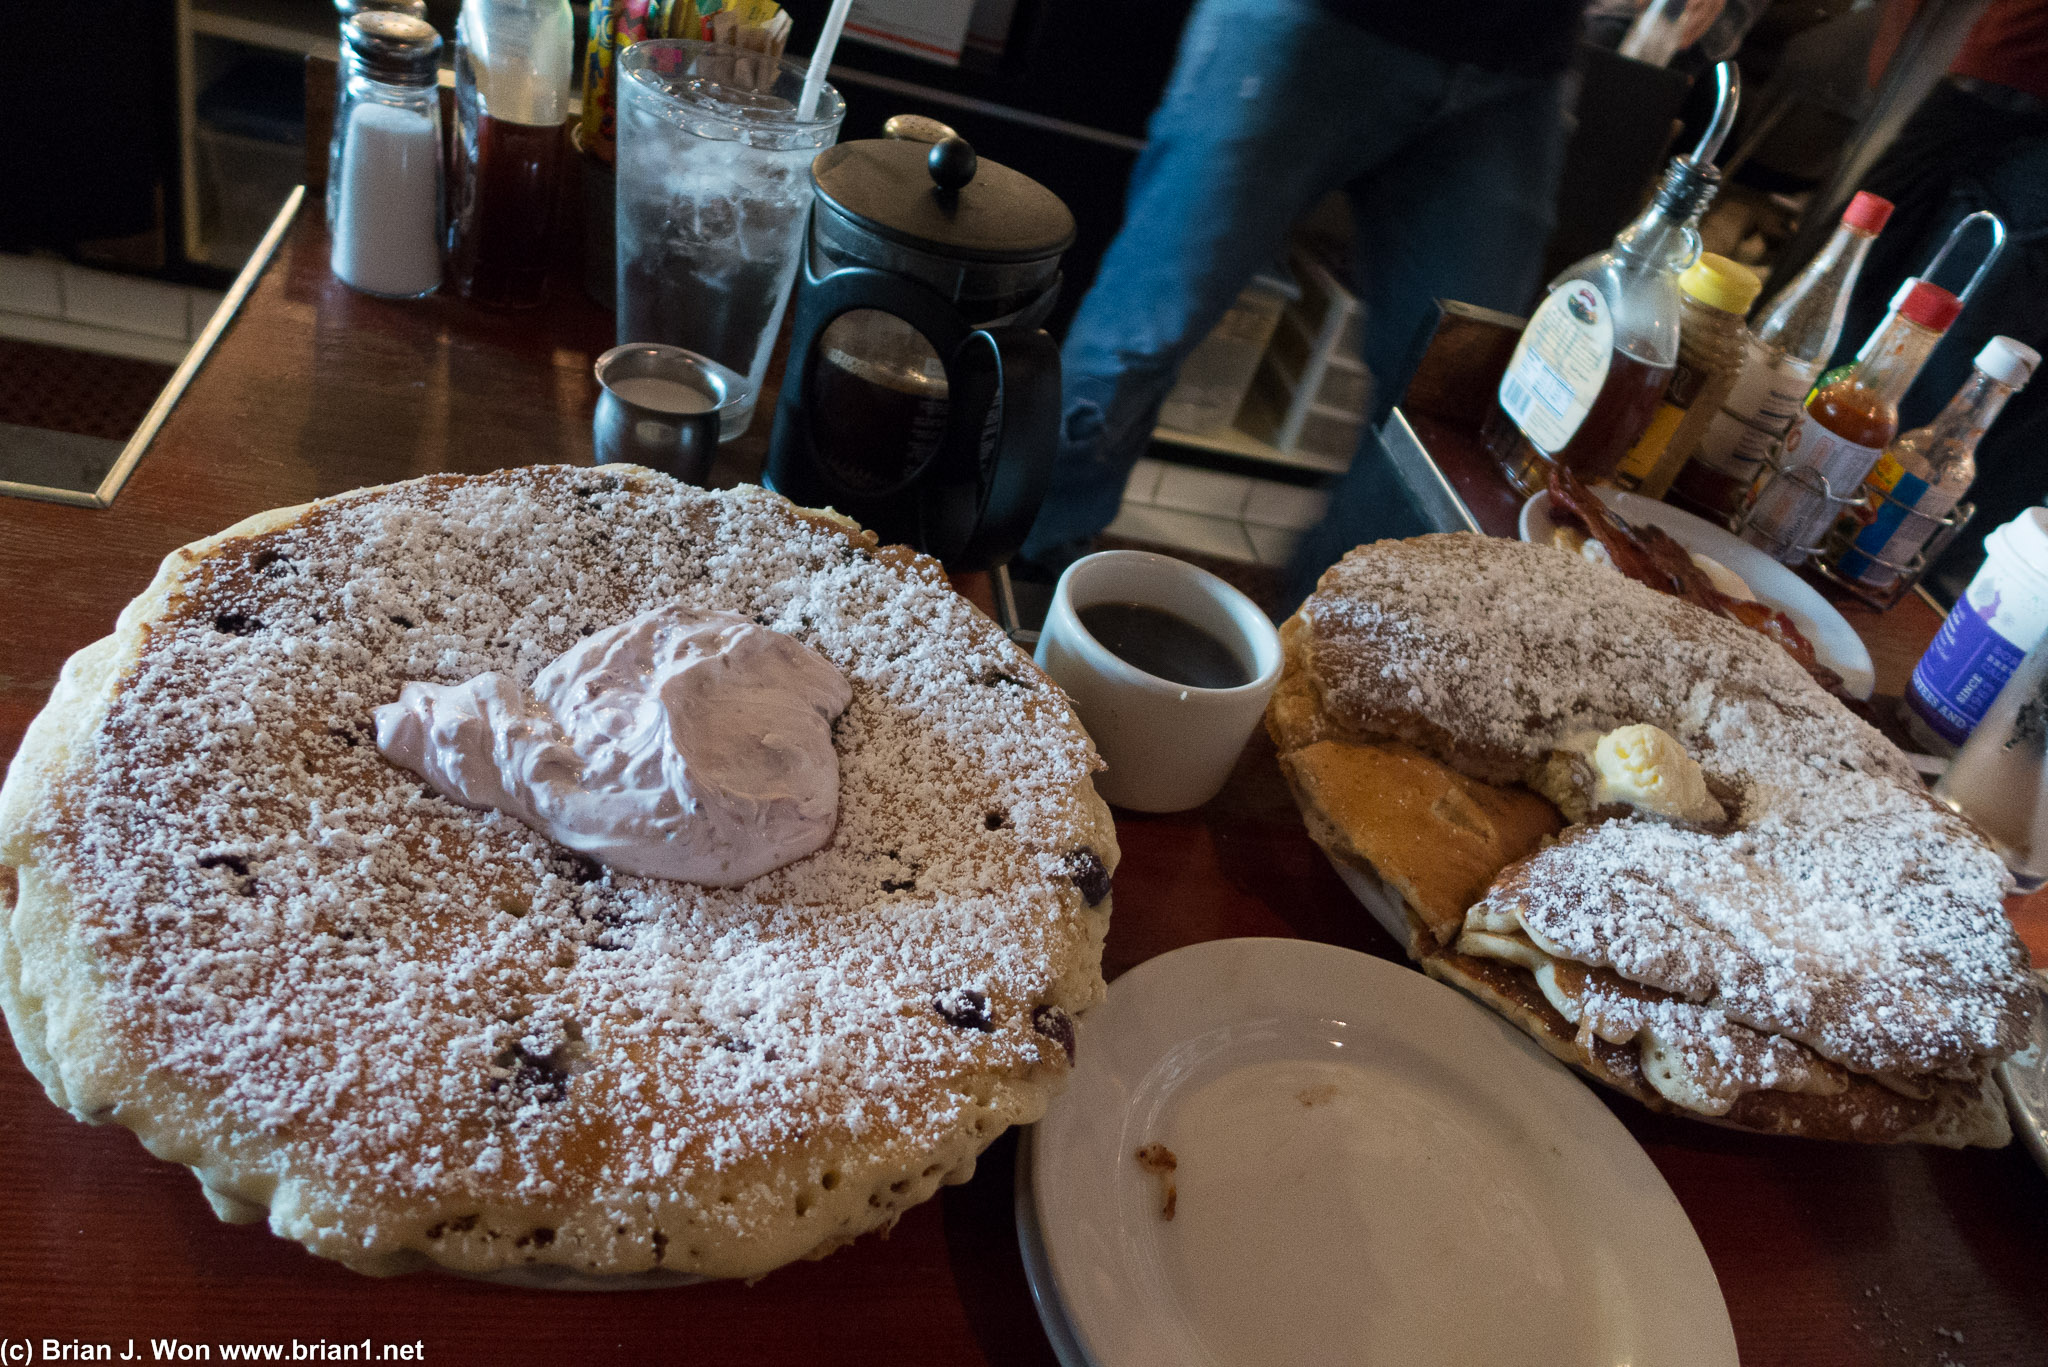 The pancakes are so enormous they're a spectacle.